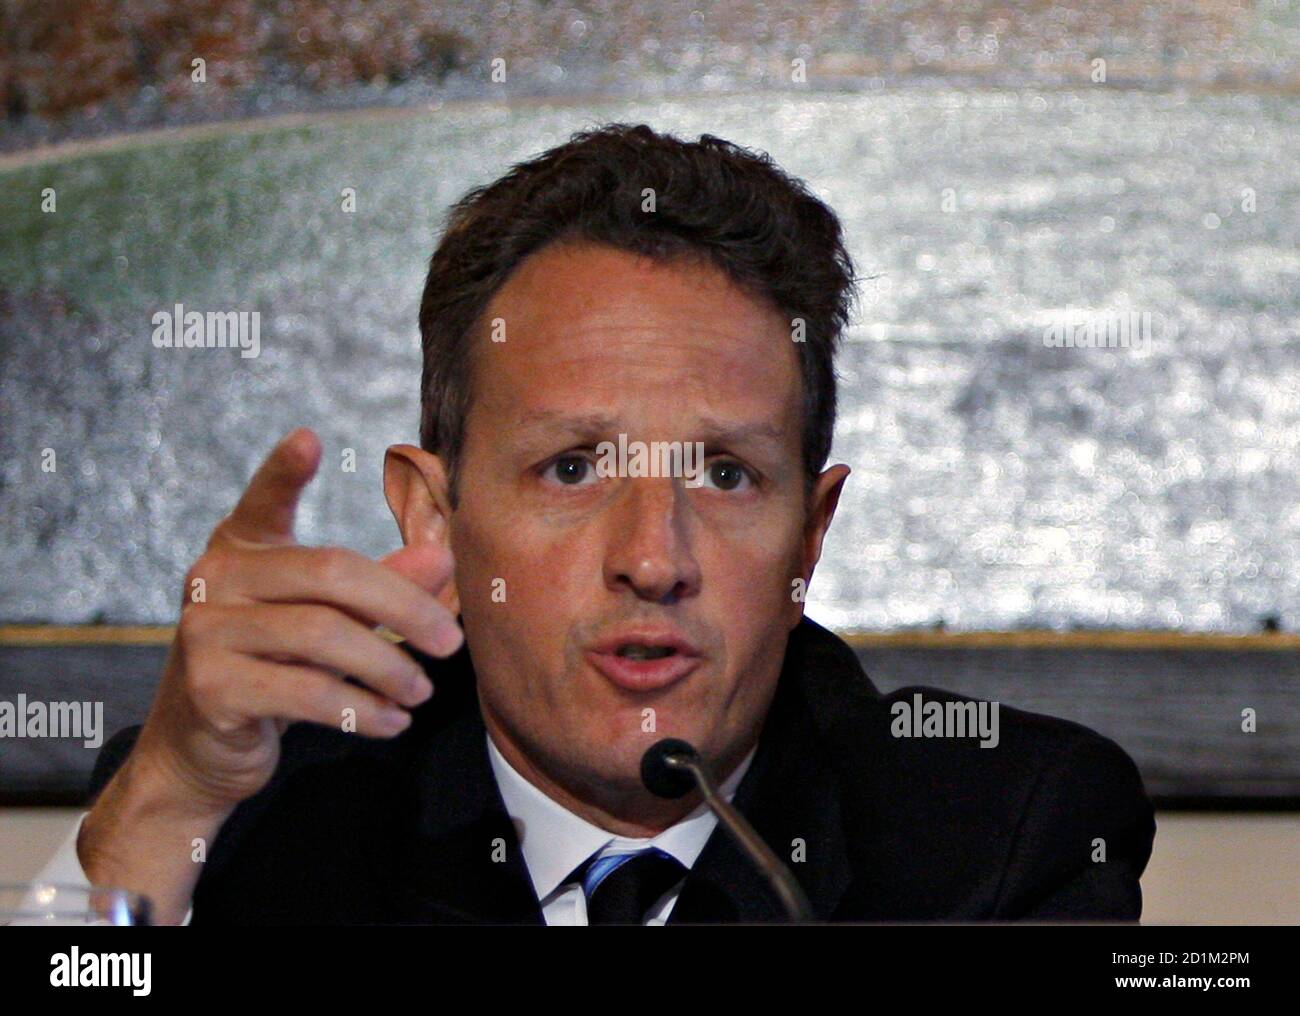 U.S. Treasury Secretary Tim Geithner speaks during a discussion to combat mortgage modification fraud in the housing market at a meeting at the Treasury Department in Washington, September 17, 2009. Geithner said on Thursday the Obama administration has not yet decided whether to extend the $8,000 first-time homebuyer tax credit but was examining the issue closely.   REUTERS/Hyungwon Kang  (UNITED STATES CRIME LAW BUSINESS POLITICS) Stock Photo